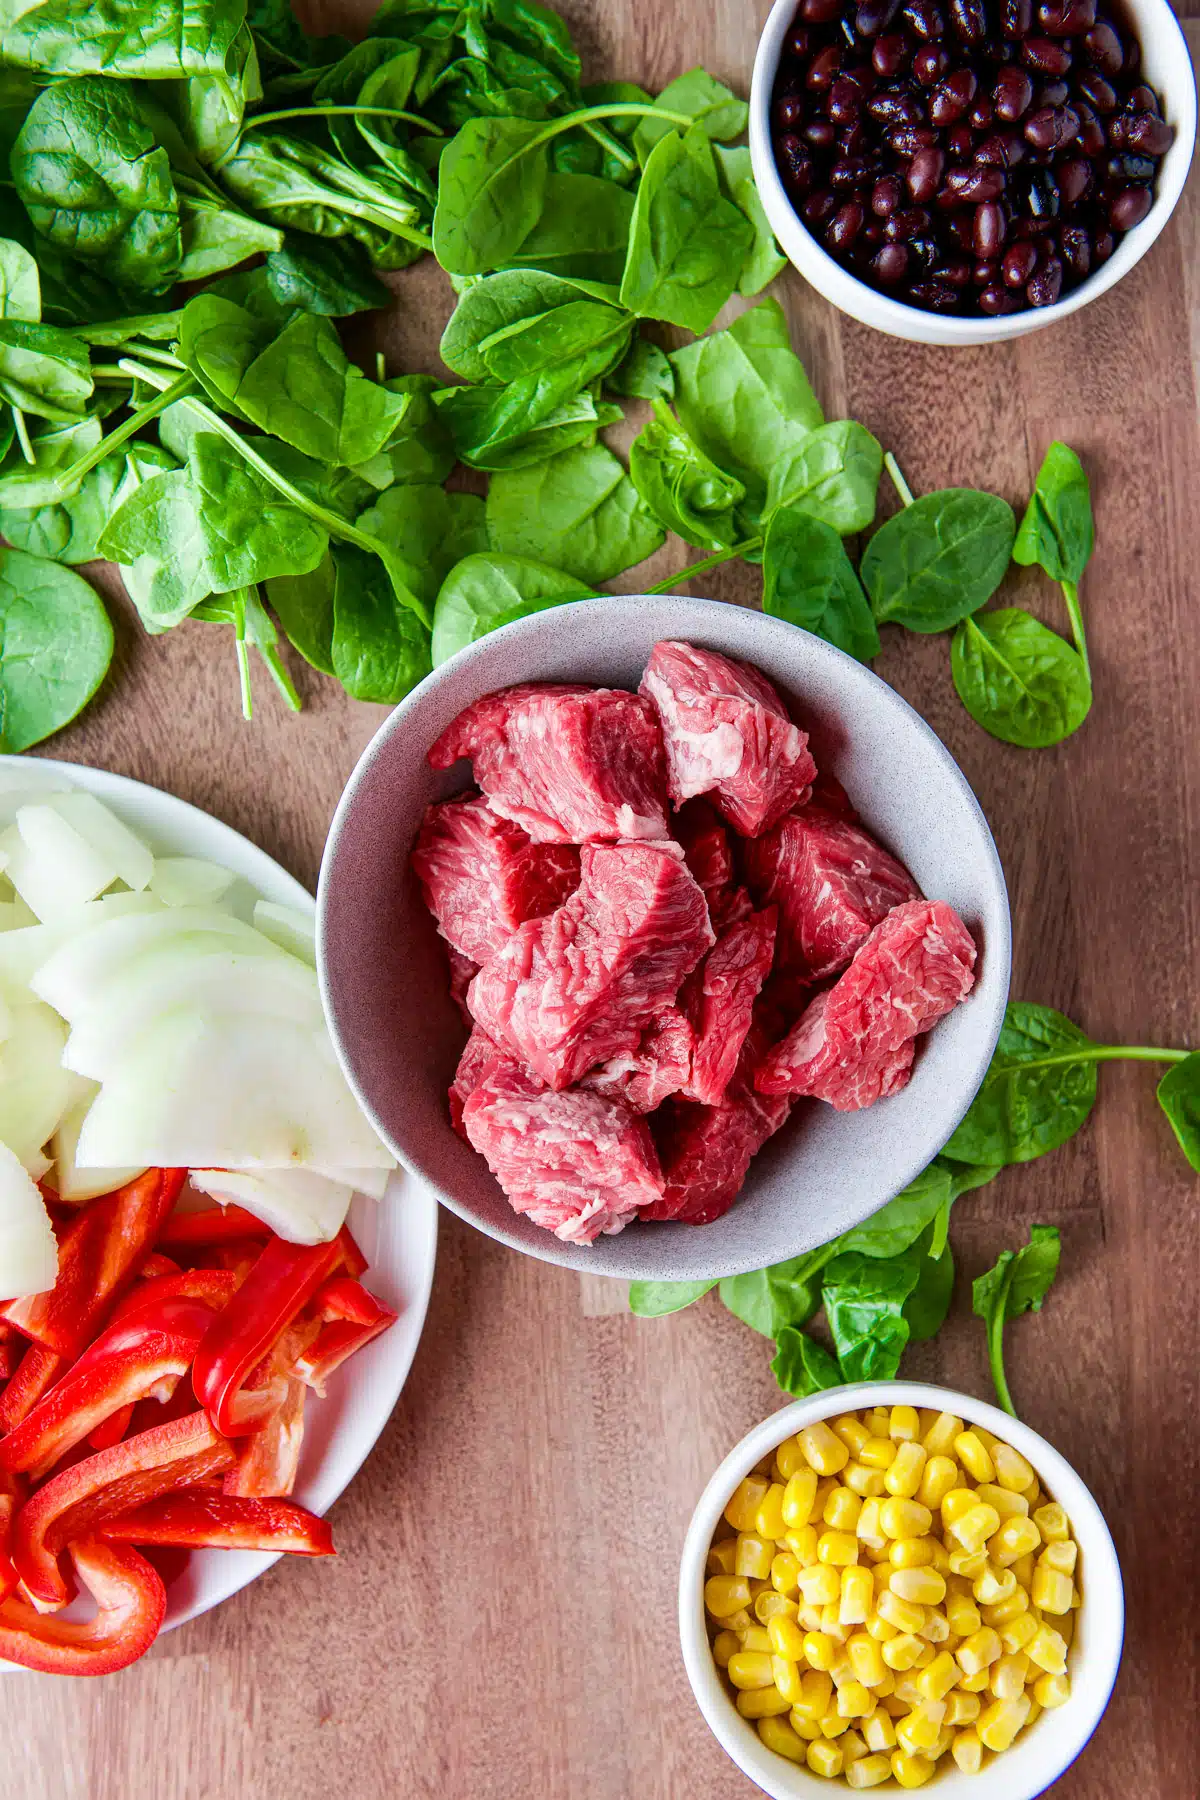 Overhead view of bowls filled with raw steak tips, corn, black beans, onion, and red bell peppers, and baby spinach